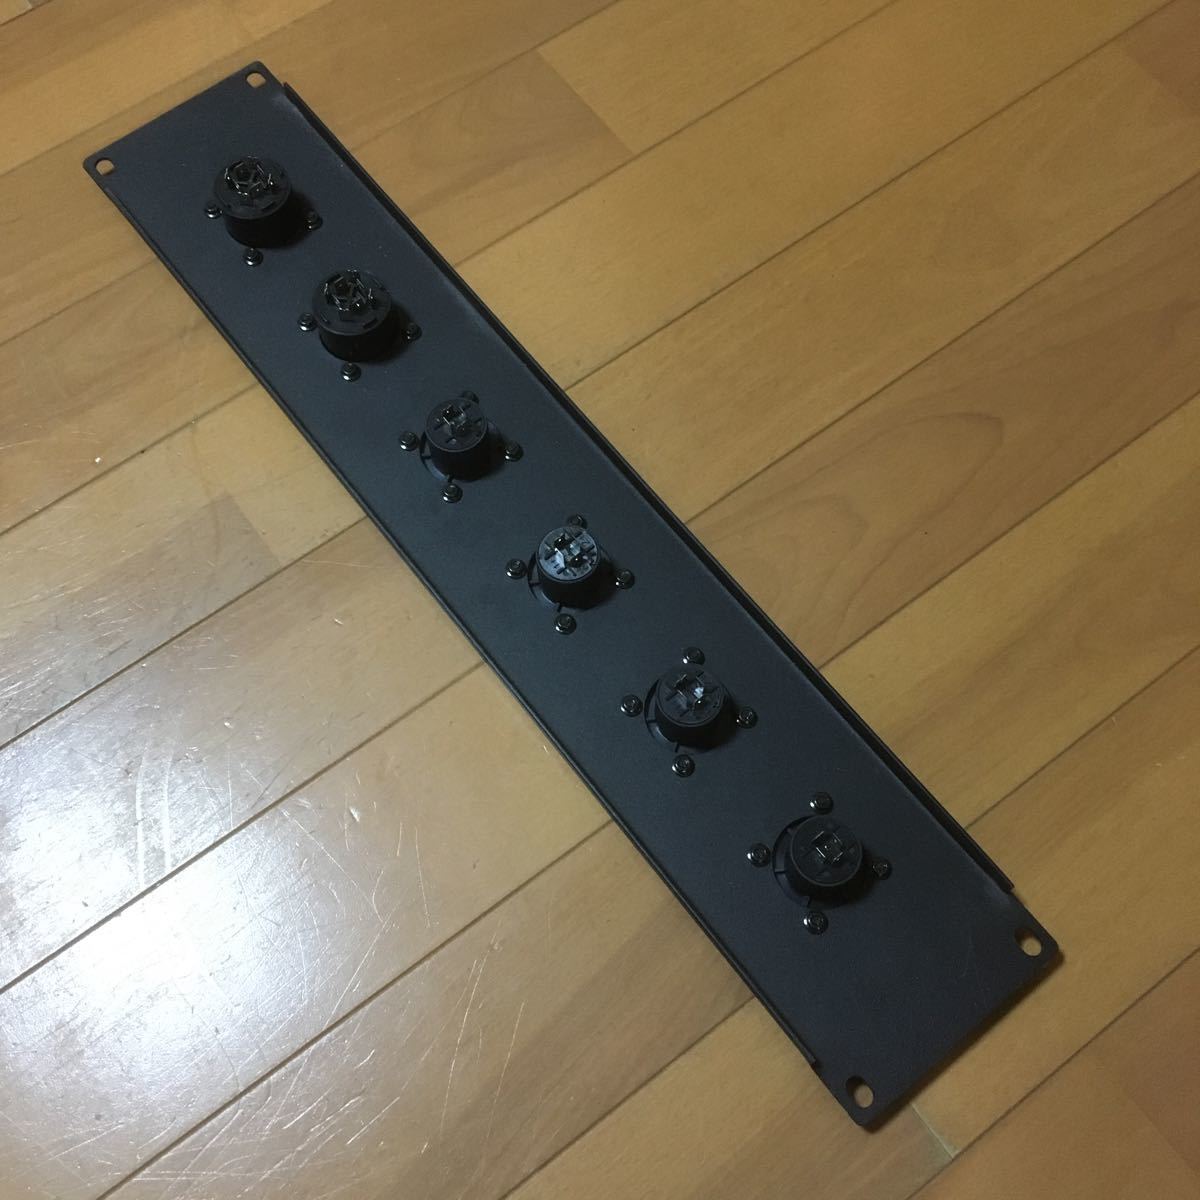  speakon patch bay patch record NL4 NL8 connector panel 2U